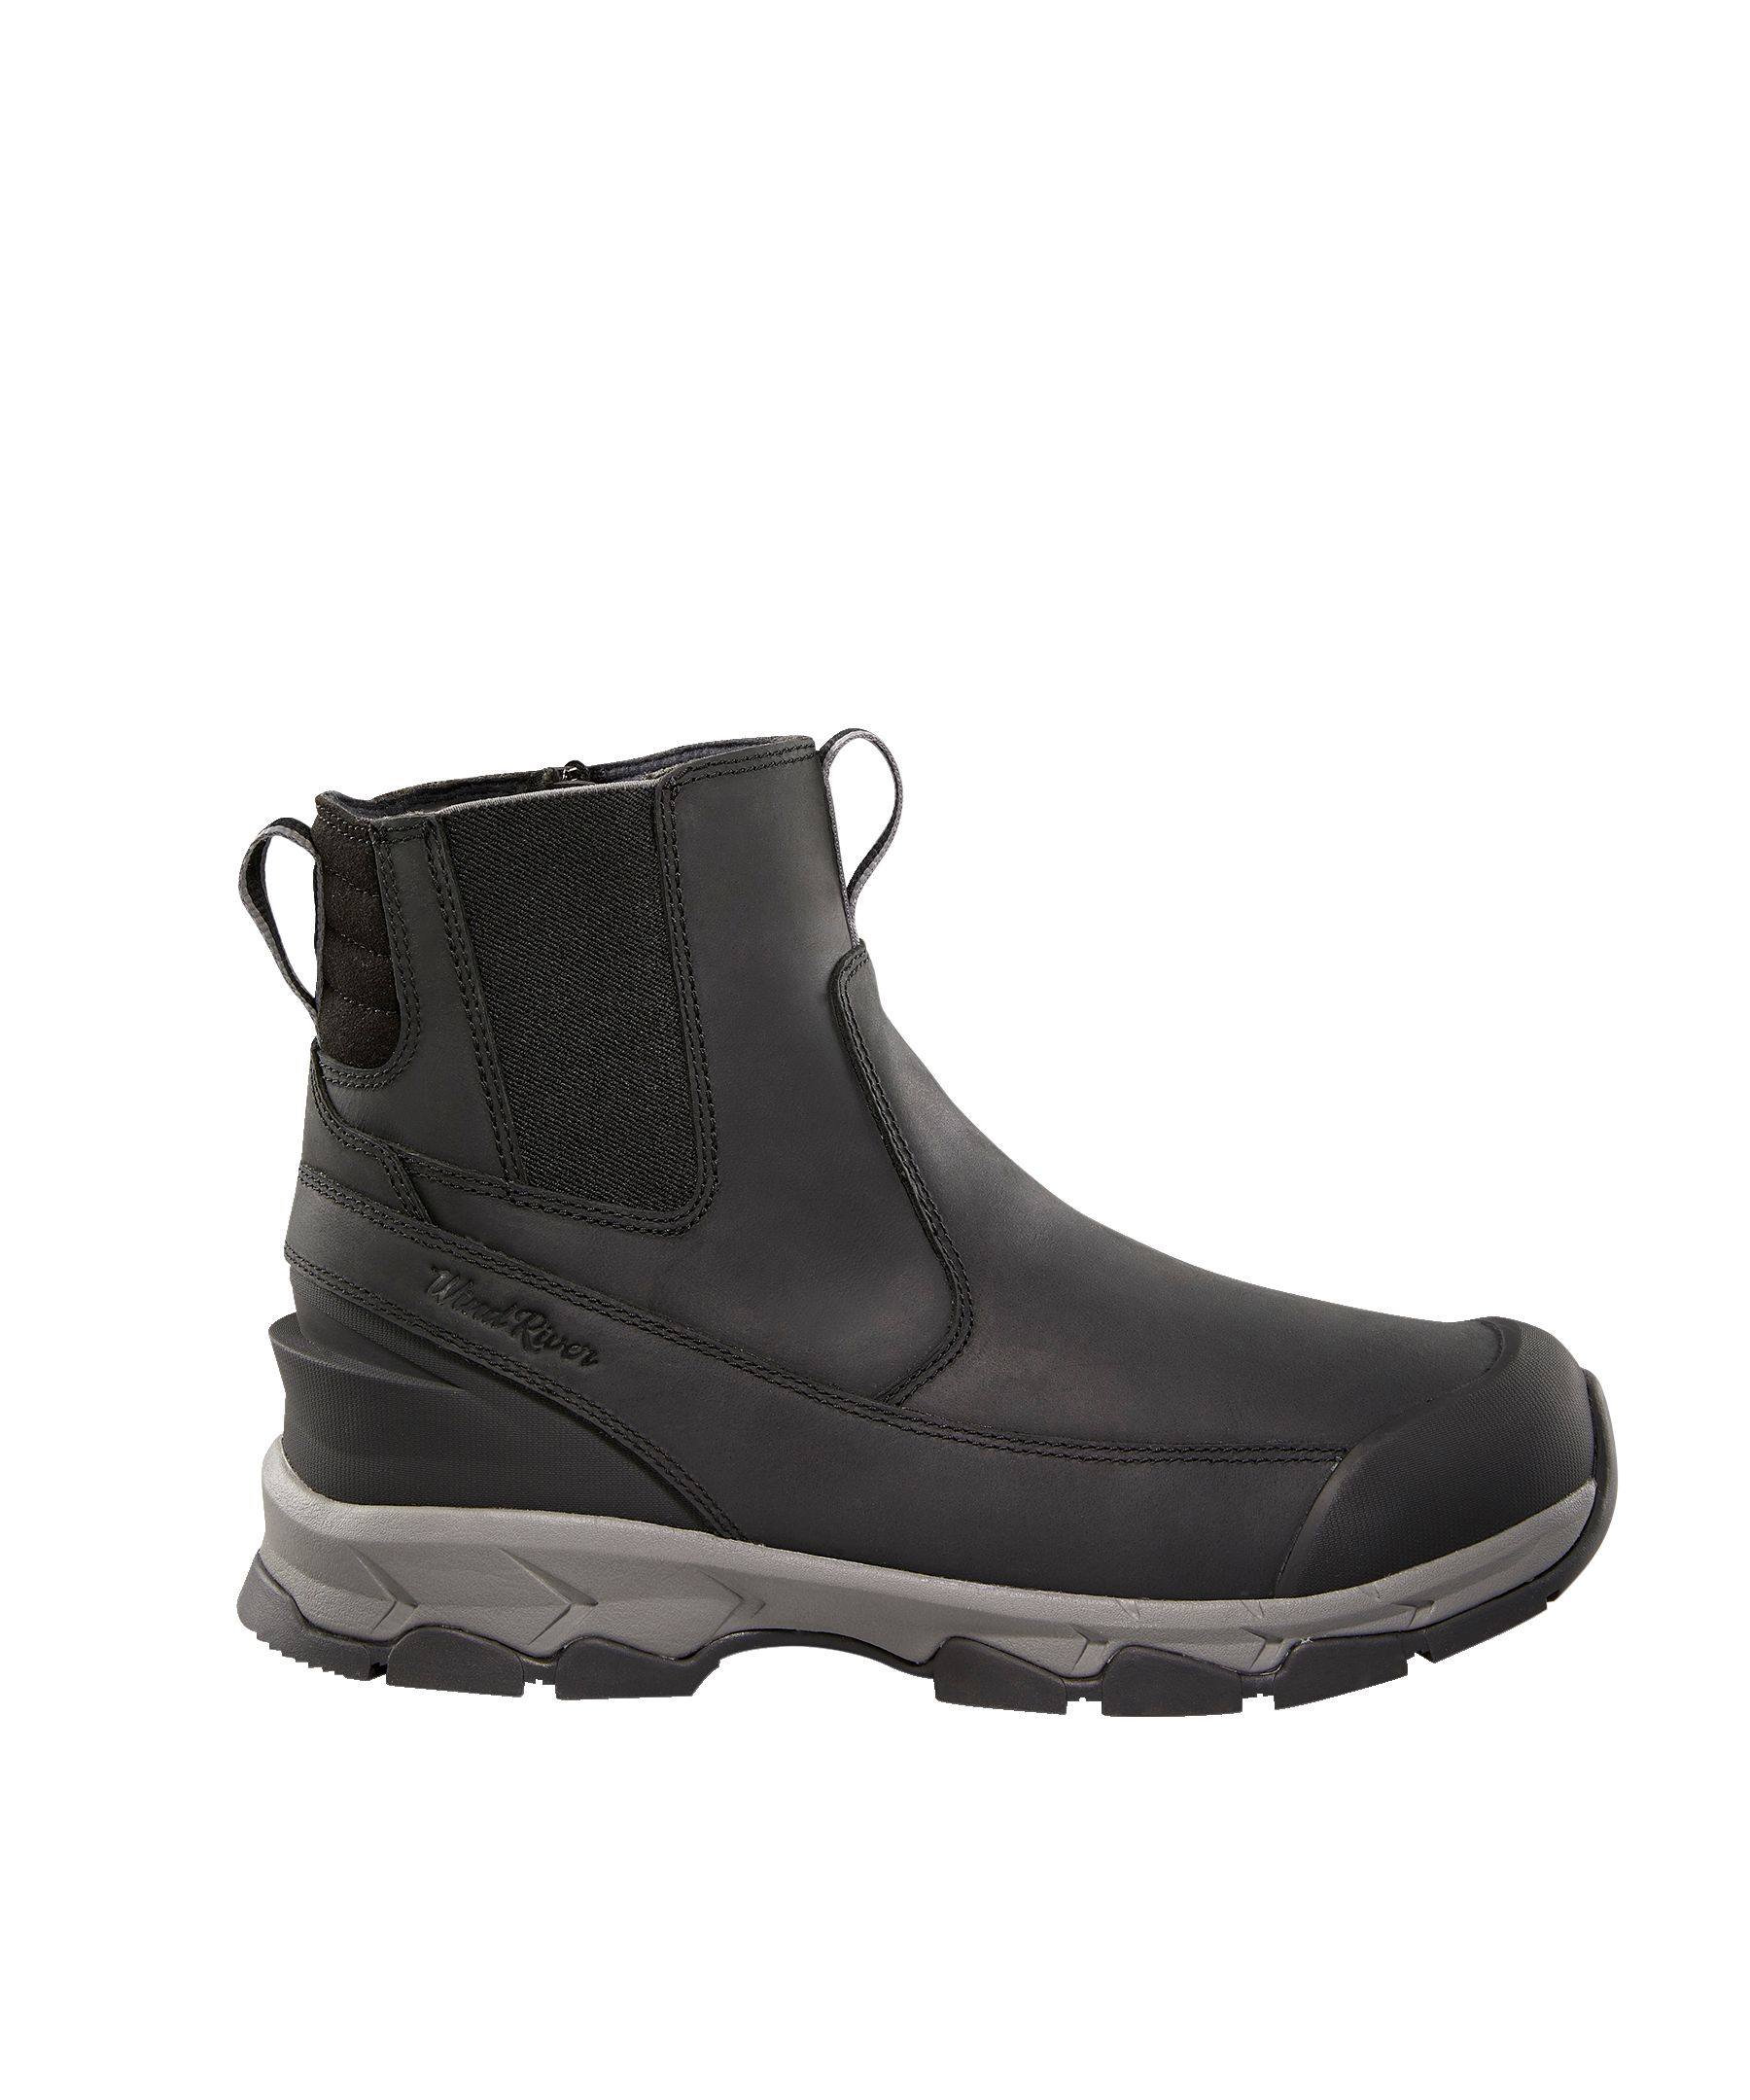 https://media-www.marks.com/product/marks-work-wearhouse/mens-world/mens-casual-footwear/410036244116/windriver-snow-trekker-2-0-icefx-winter-boots-bl-ea7239e6-e03c-4e95-ac13-0ebd05ffcd10-jpgrendition.jpg?imdensity=1&imwidth=1244&impolicy=mZoom